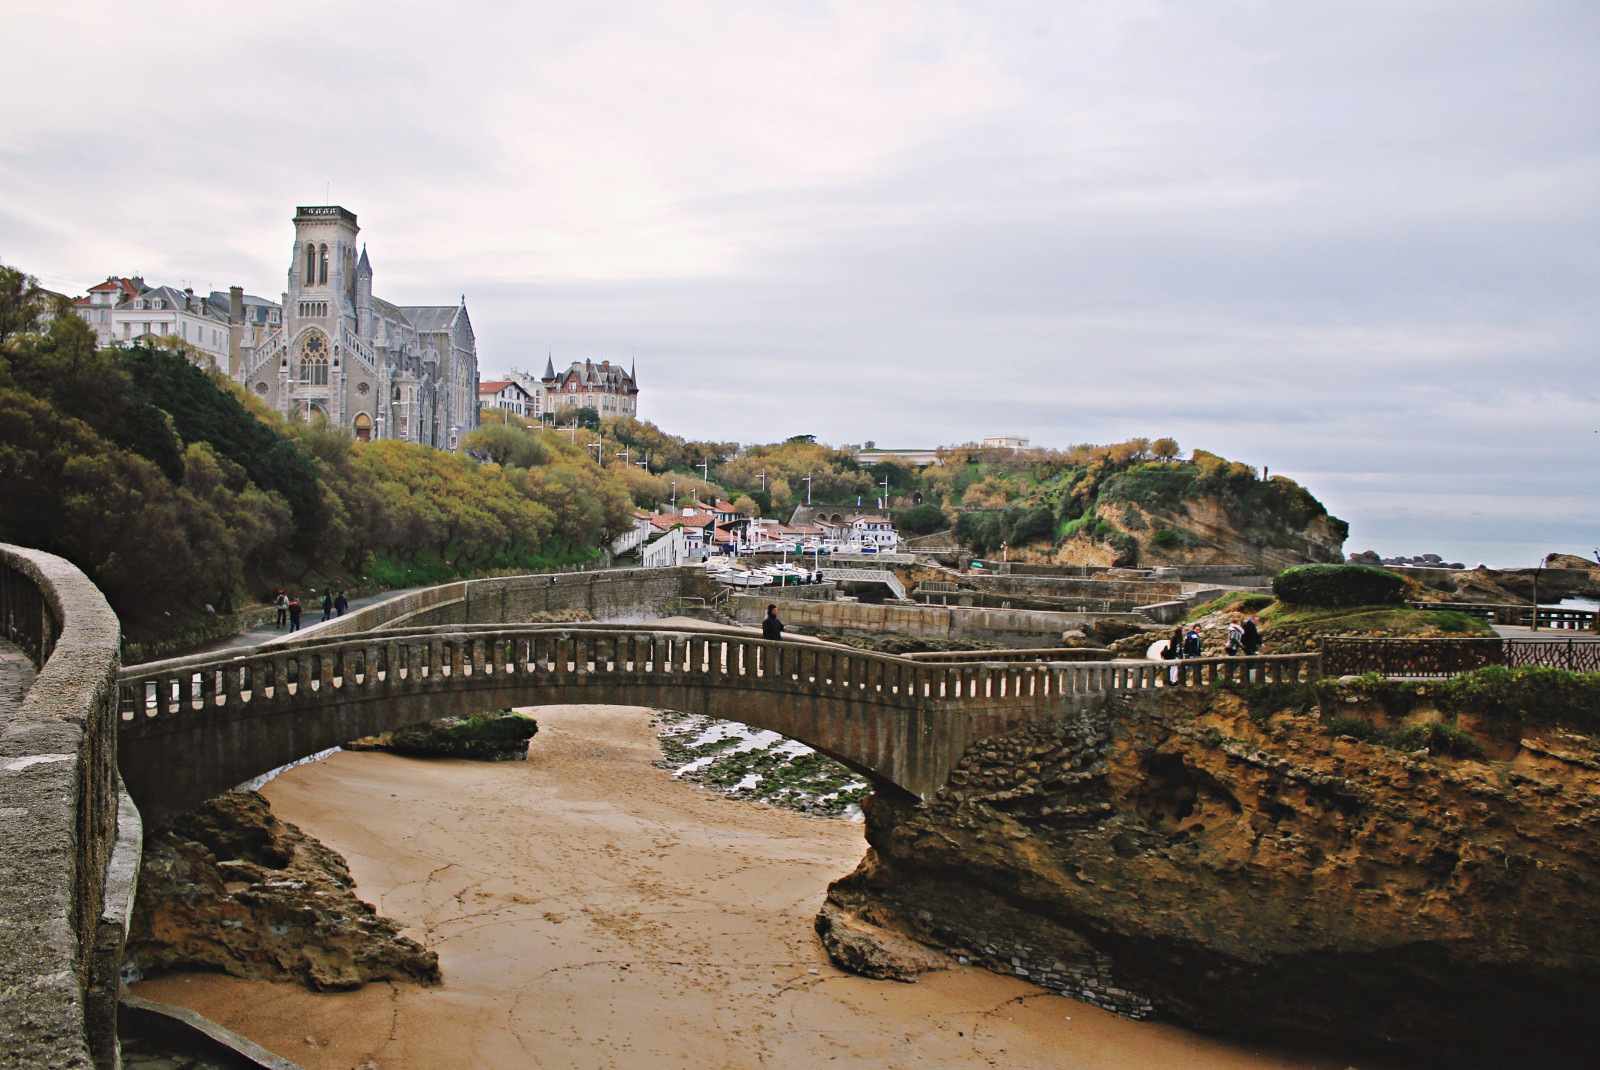 Bridge over sand along coast with building on cloudy day in Biarritz, France